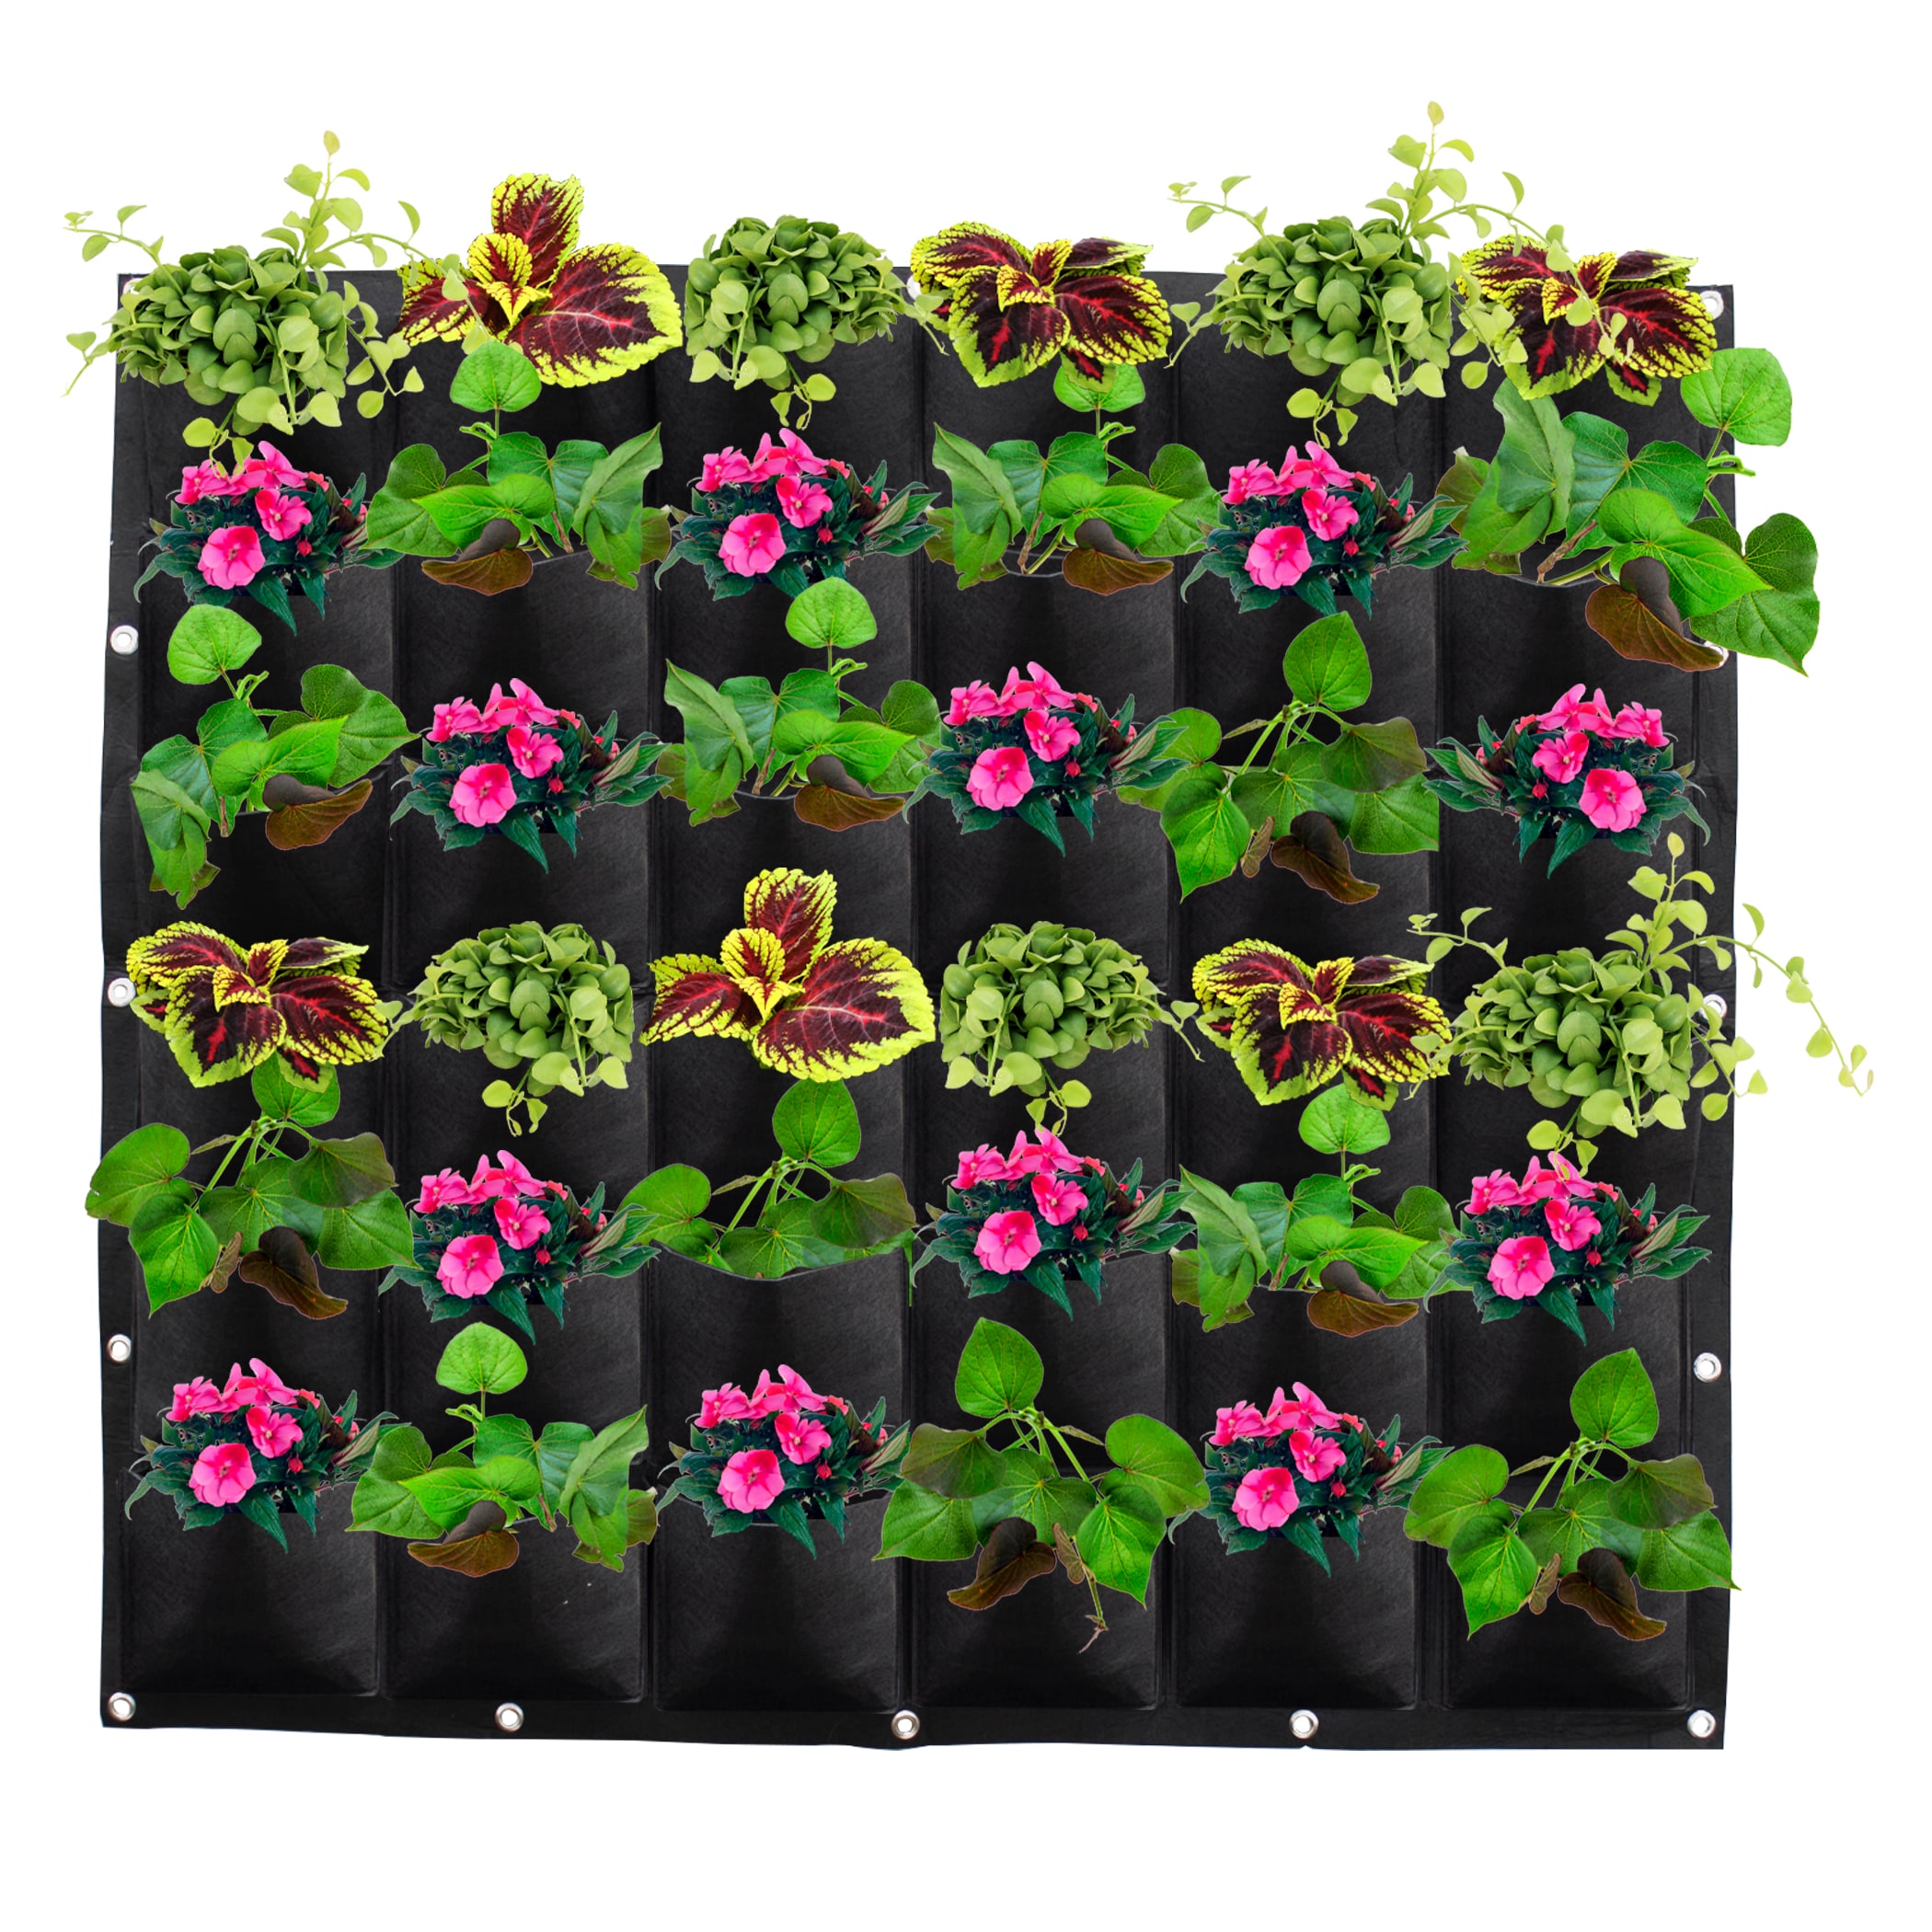 Hanging Grow Bag Flower Pouch Wall Planter Outdoor Gardening Patio